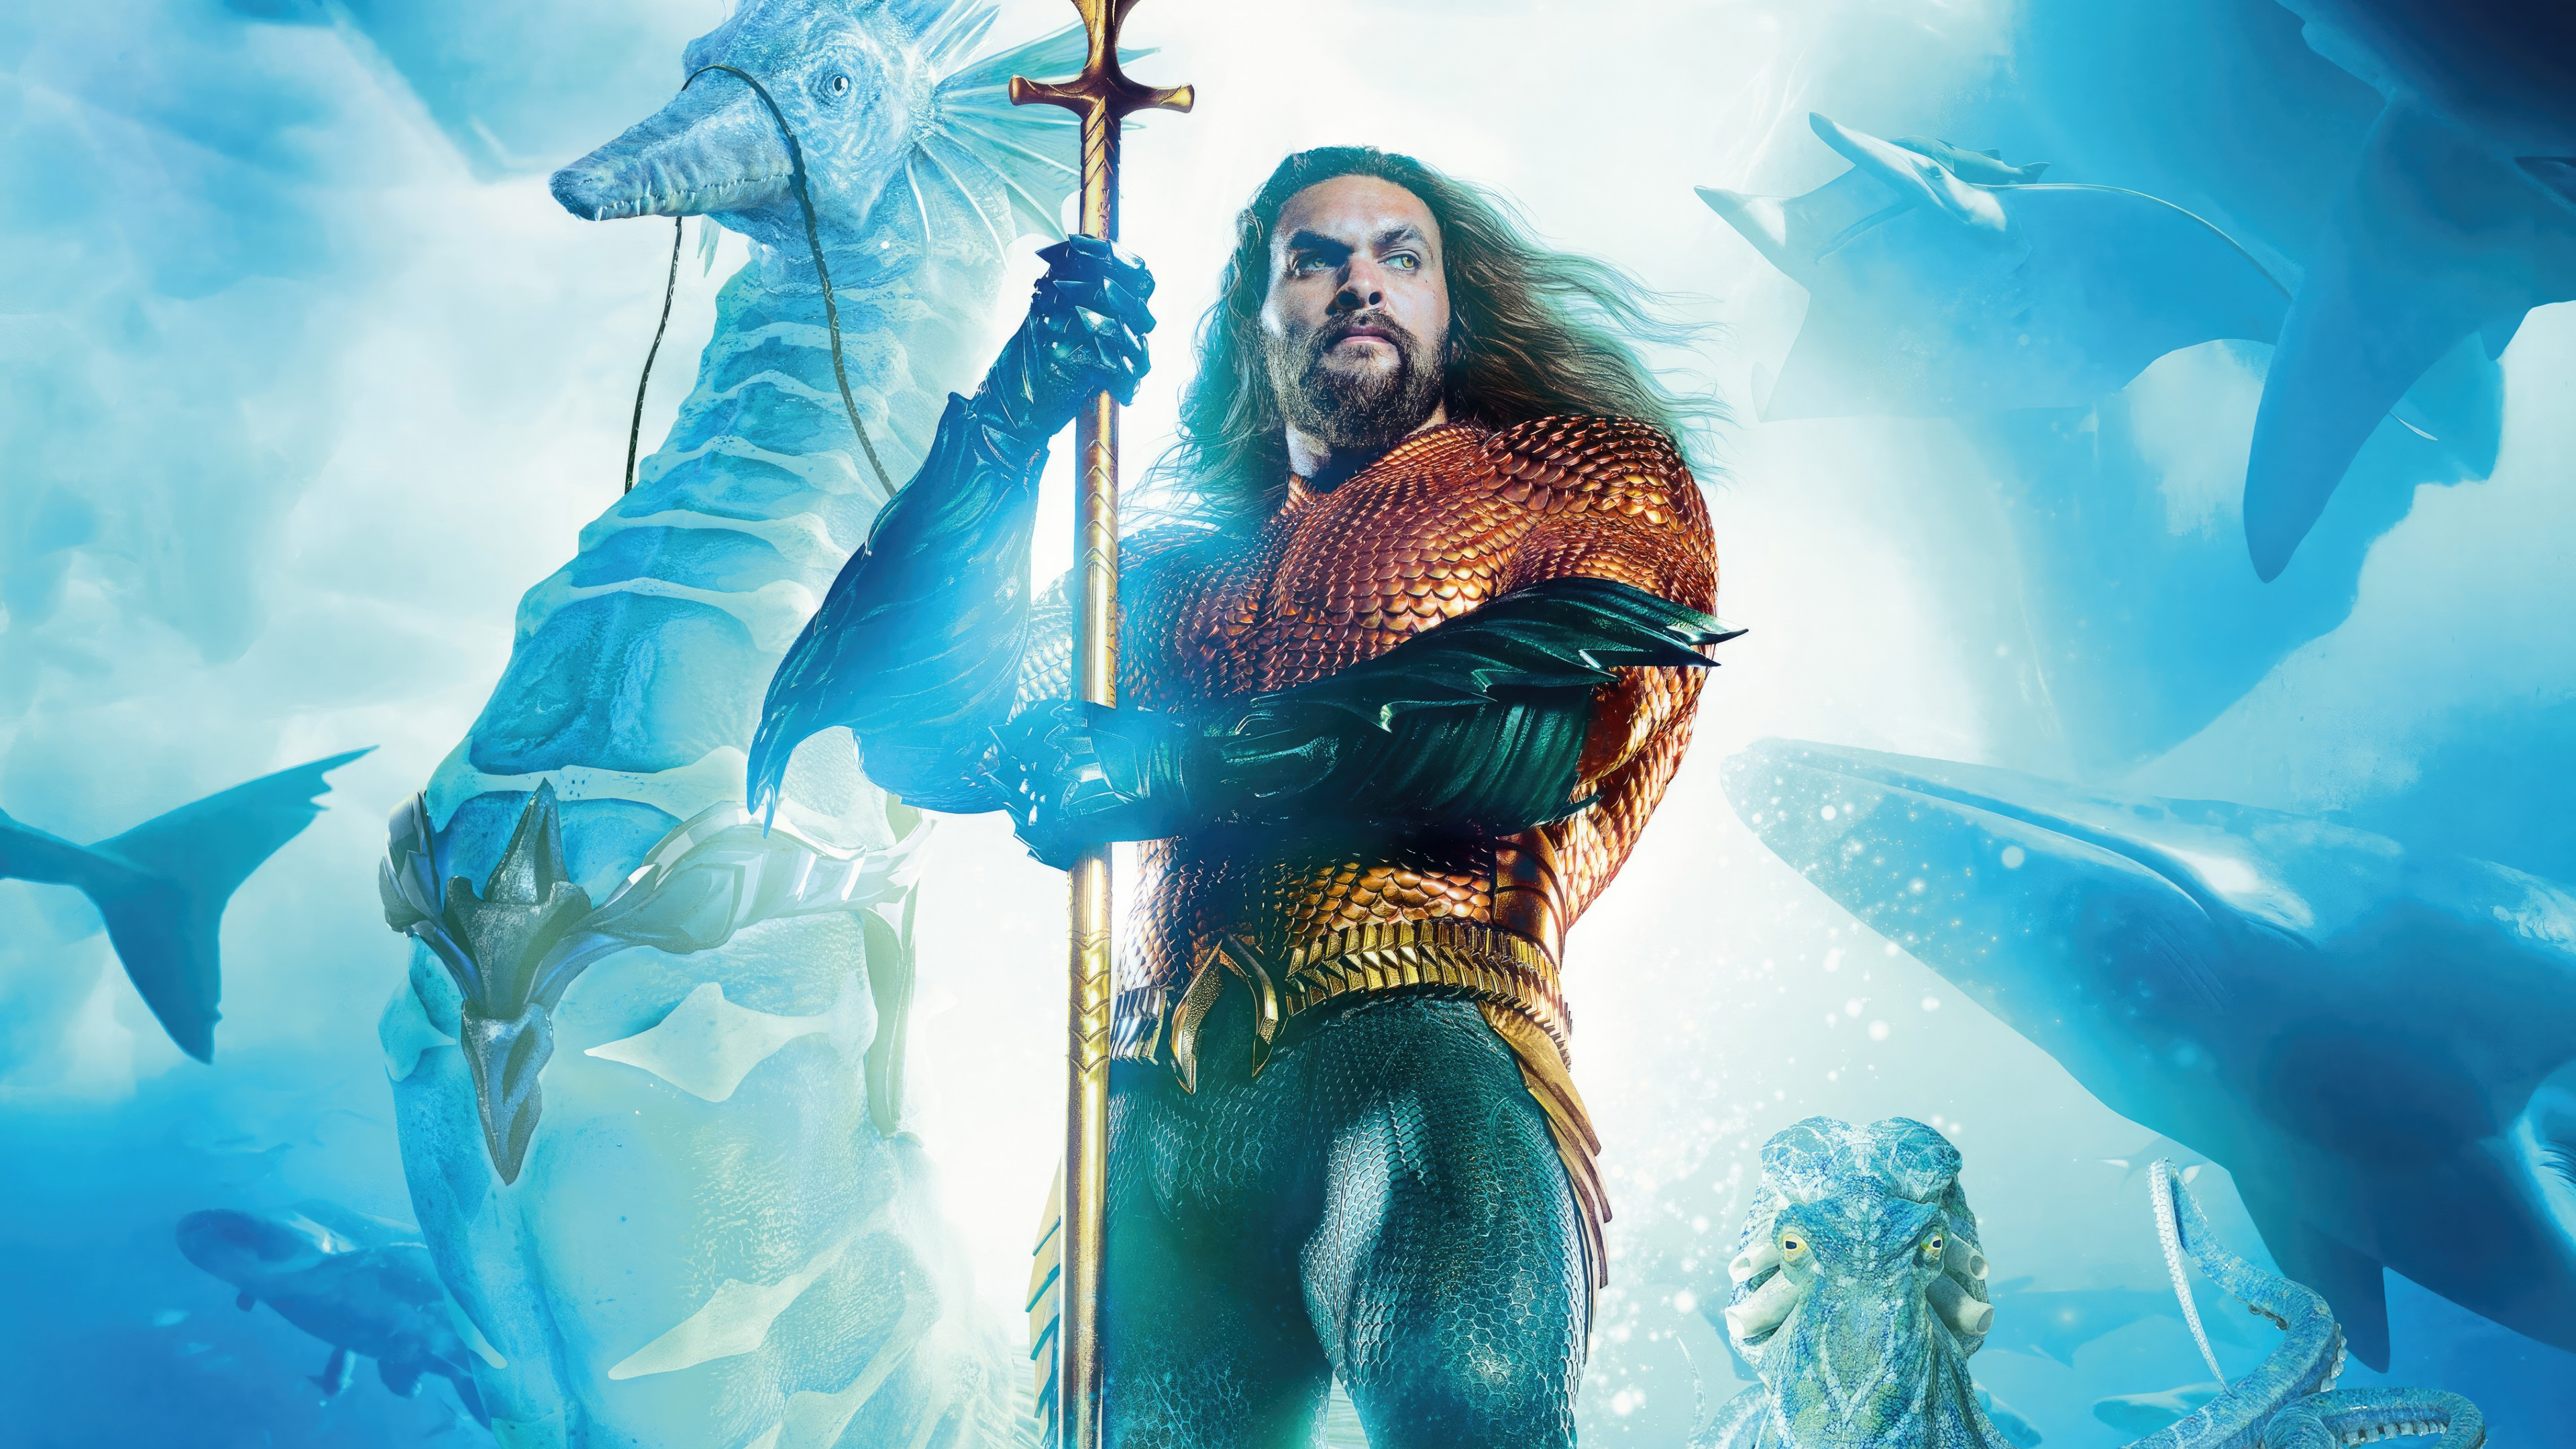 Aquaman And The Lost Kingdom Chinese Imax Poster Wallpaper, HD Movies Wallpaper, 4k Wallpaper, Image, Background, Photos and Picture